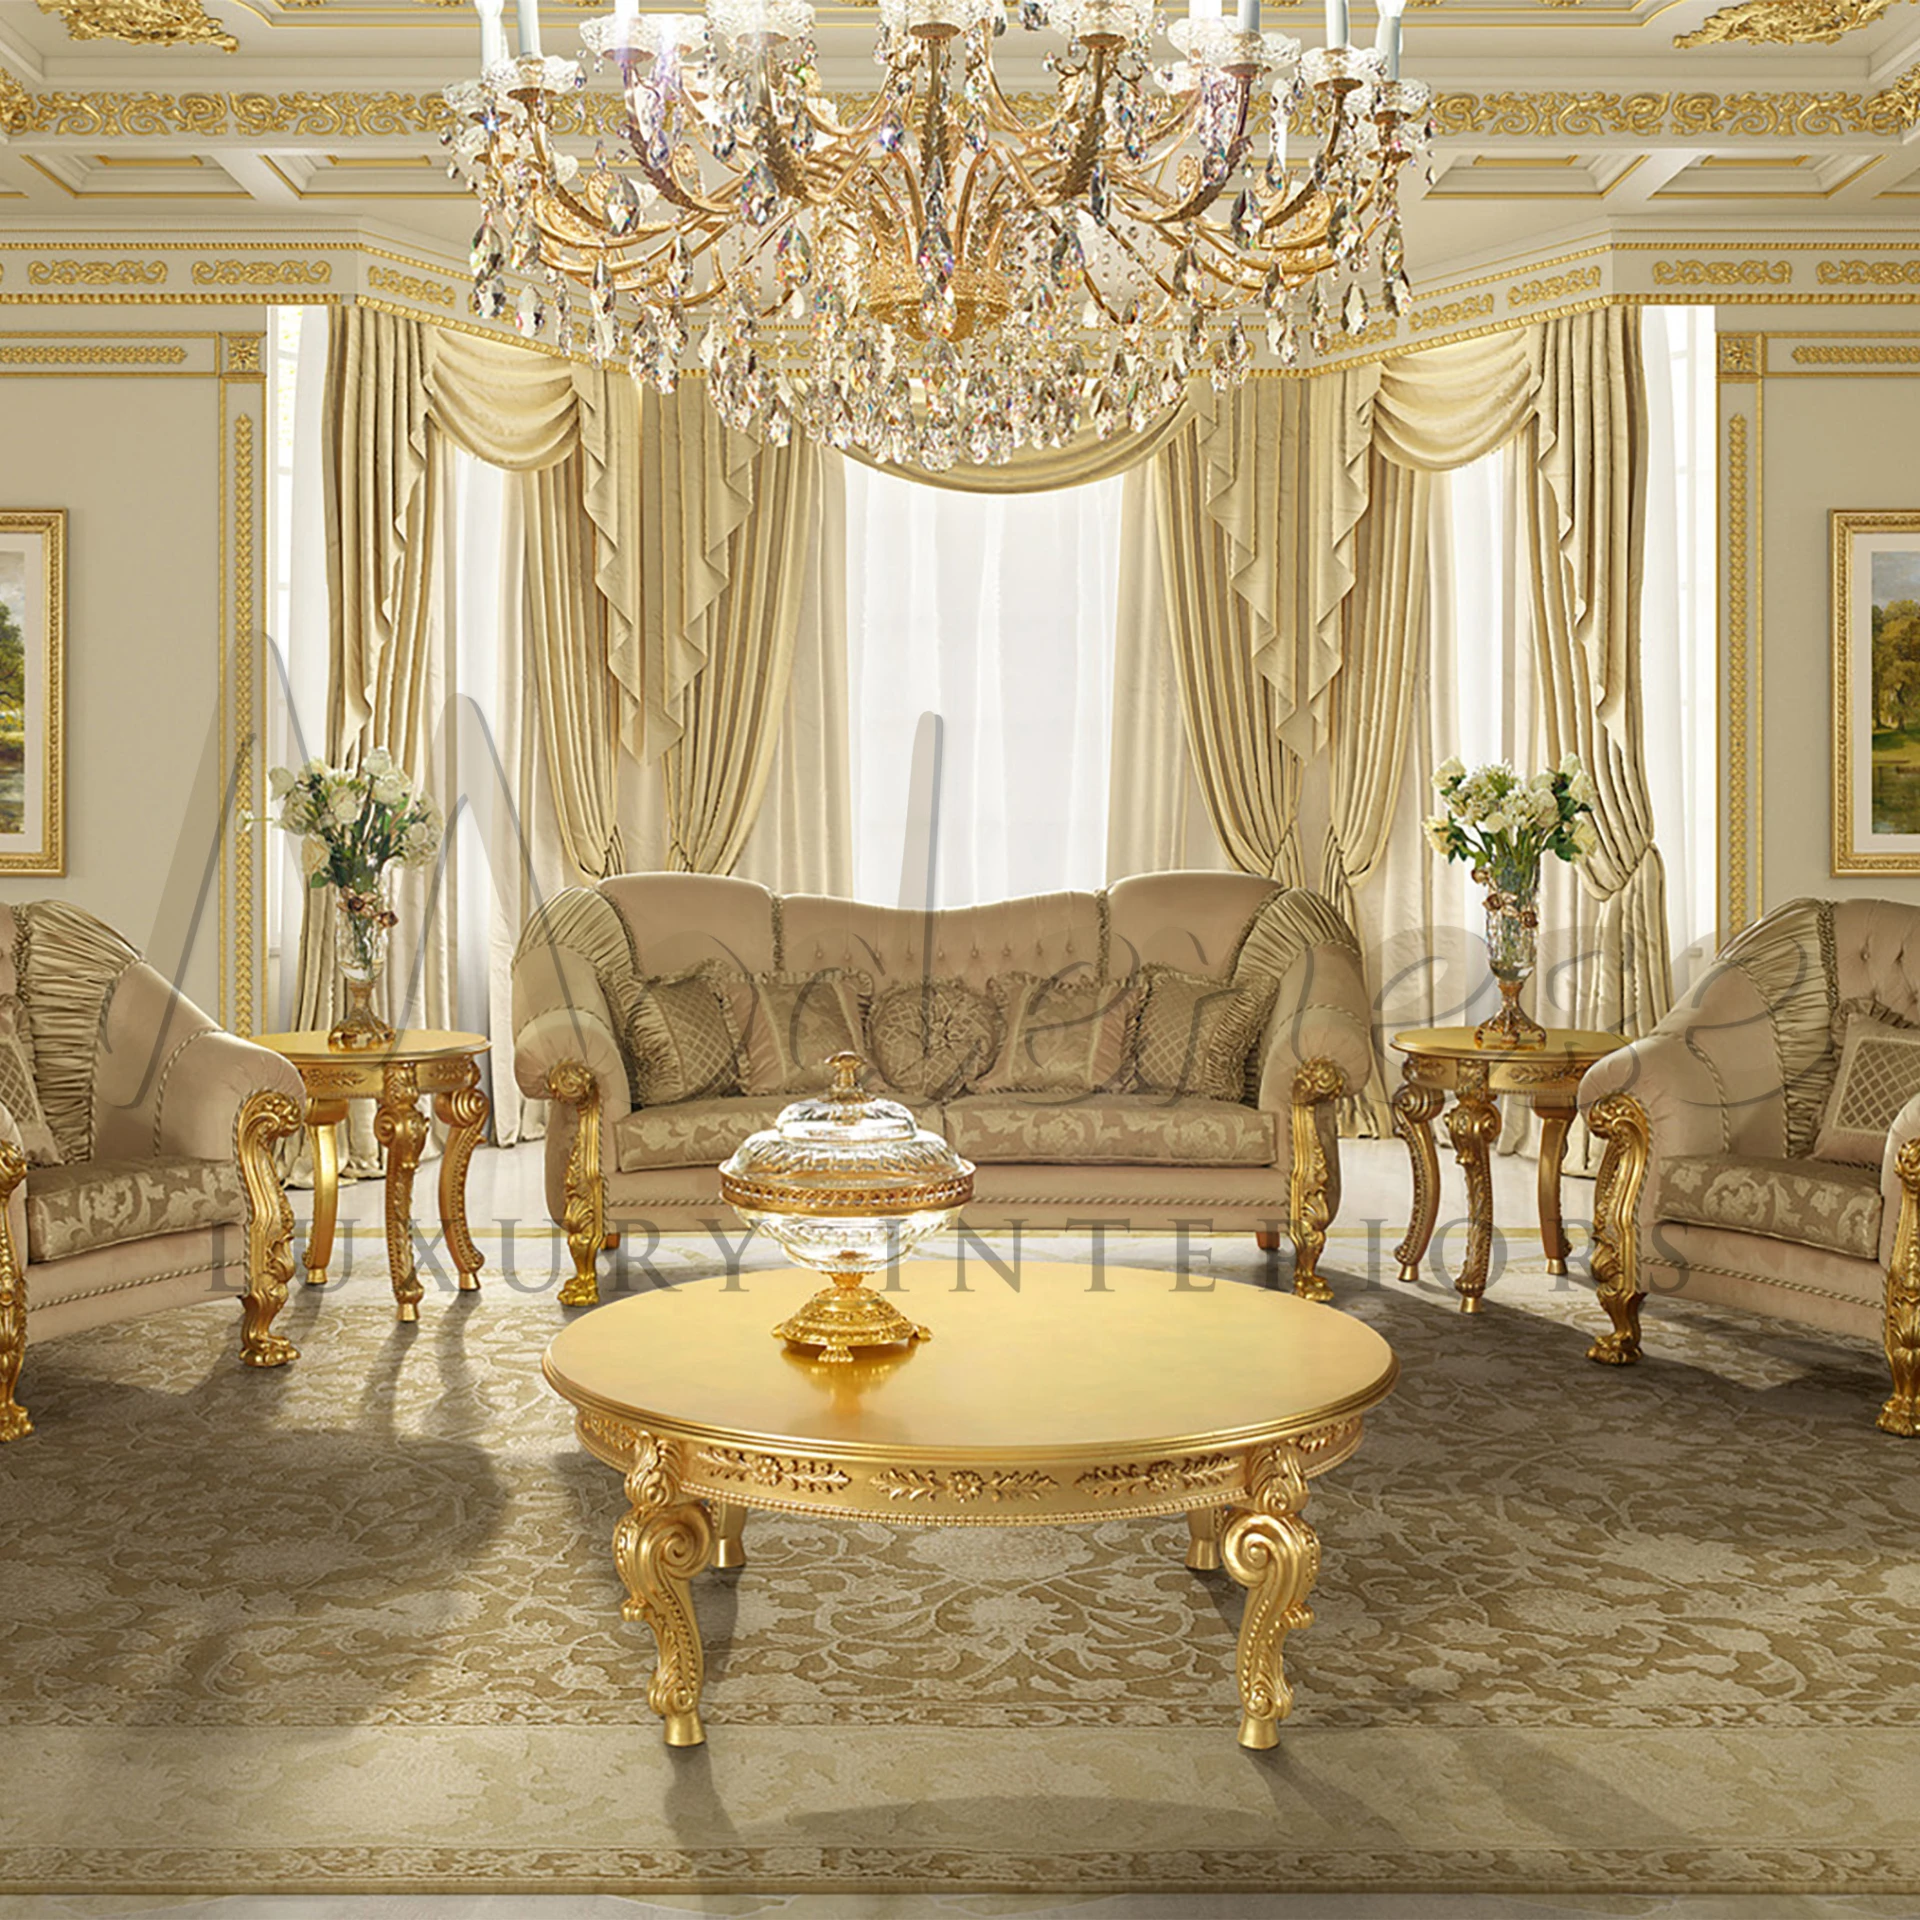 Luxurious Gilded Sofa: Timeless Beauty in Golden Beige Fabric Upholstery